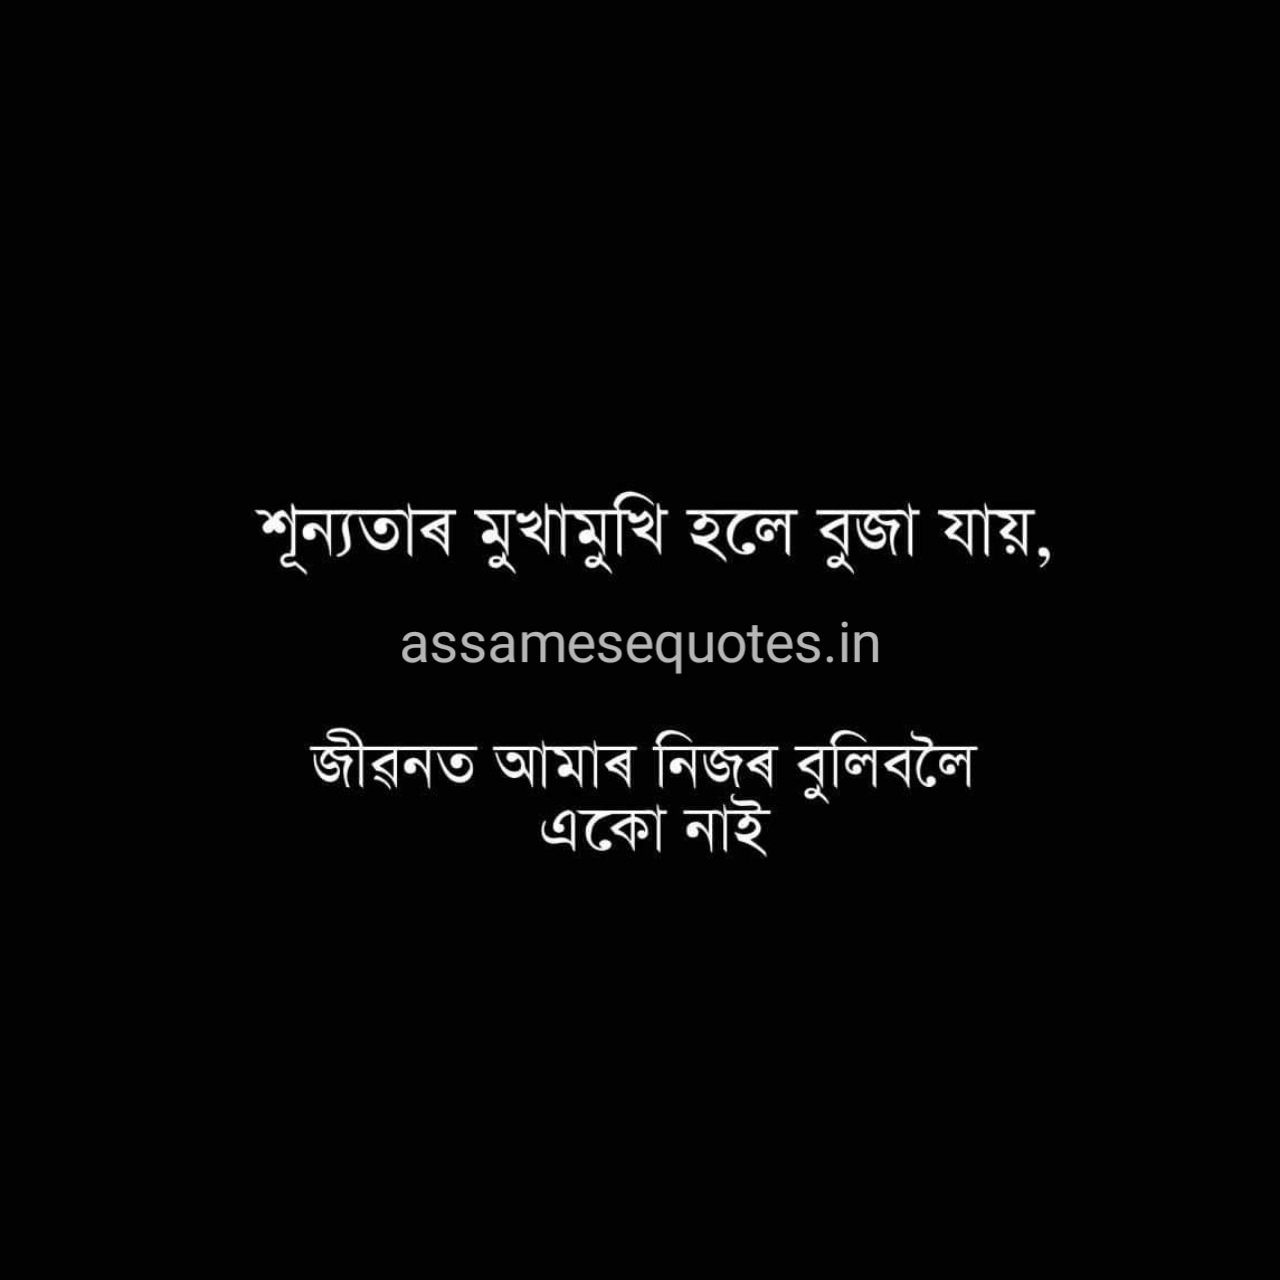 Assamese quotes on life 